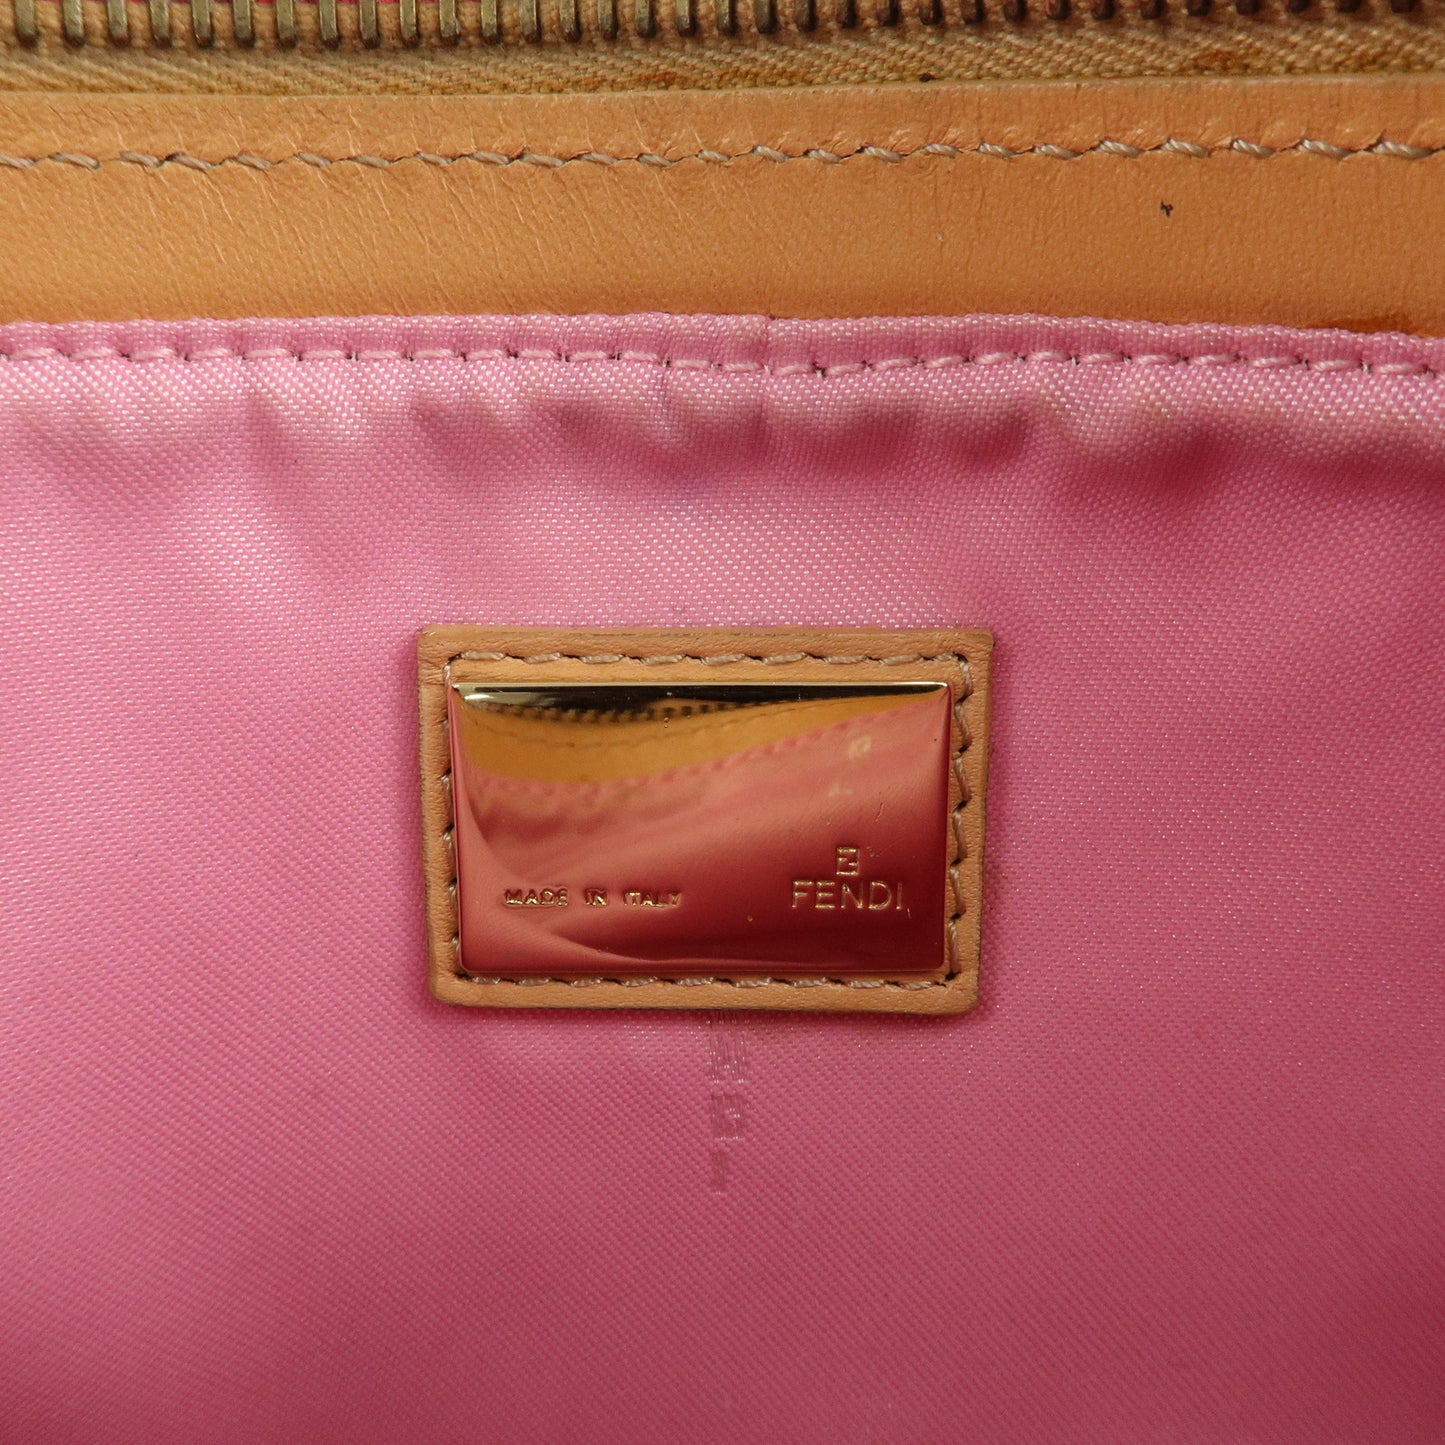 FENDI Zucchino Canvas Leather Shoulder Bag Hand Bag Pink RedUsed F/S